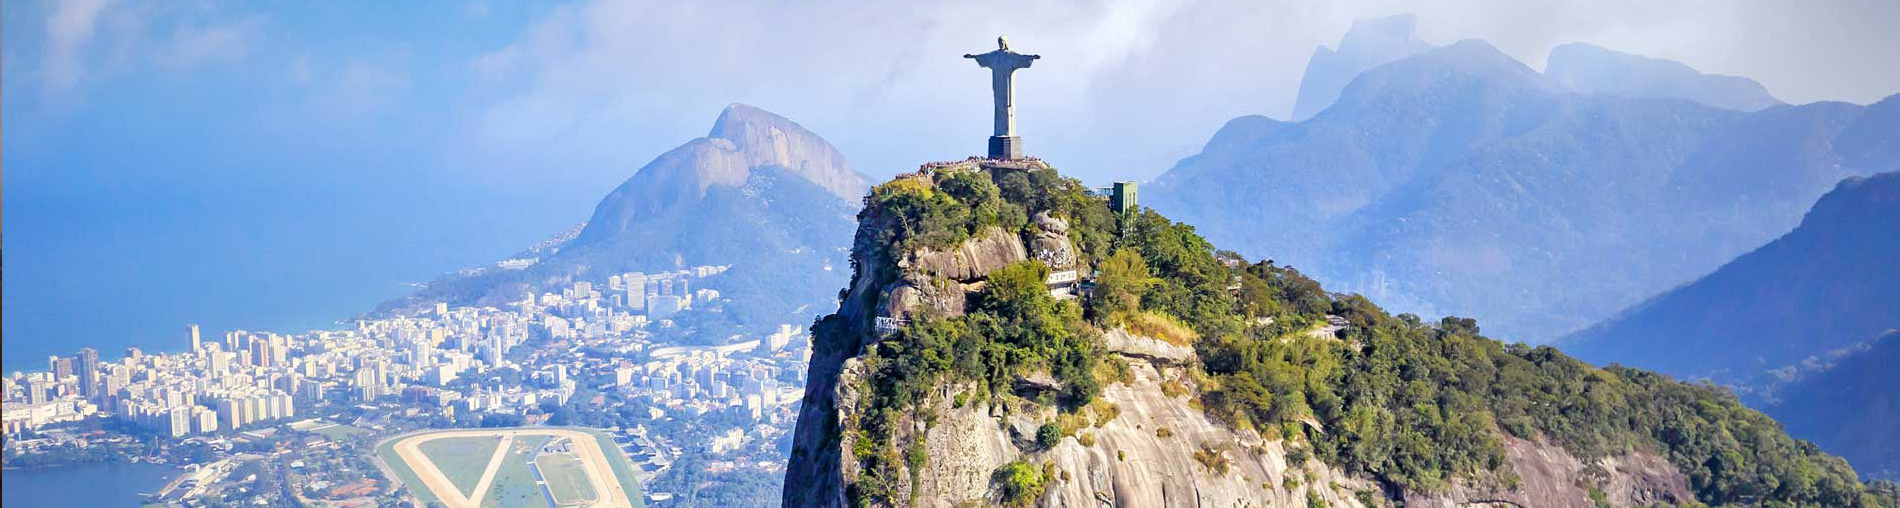 Brazil Holiday Tour Packages From India